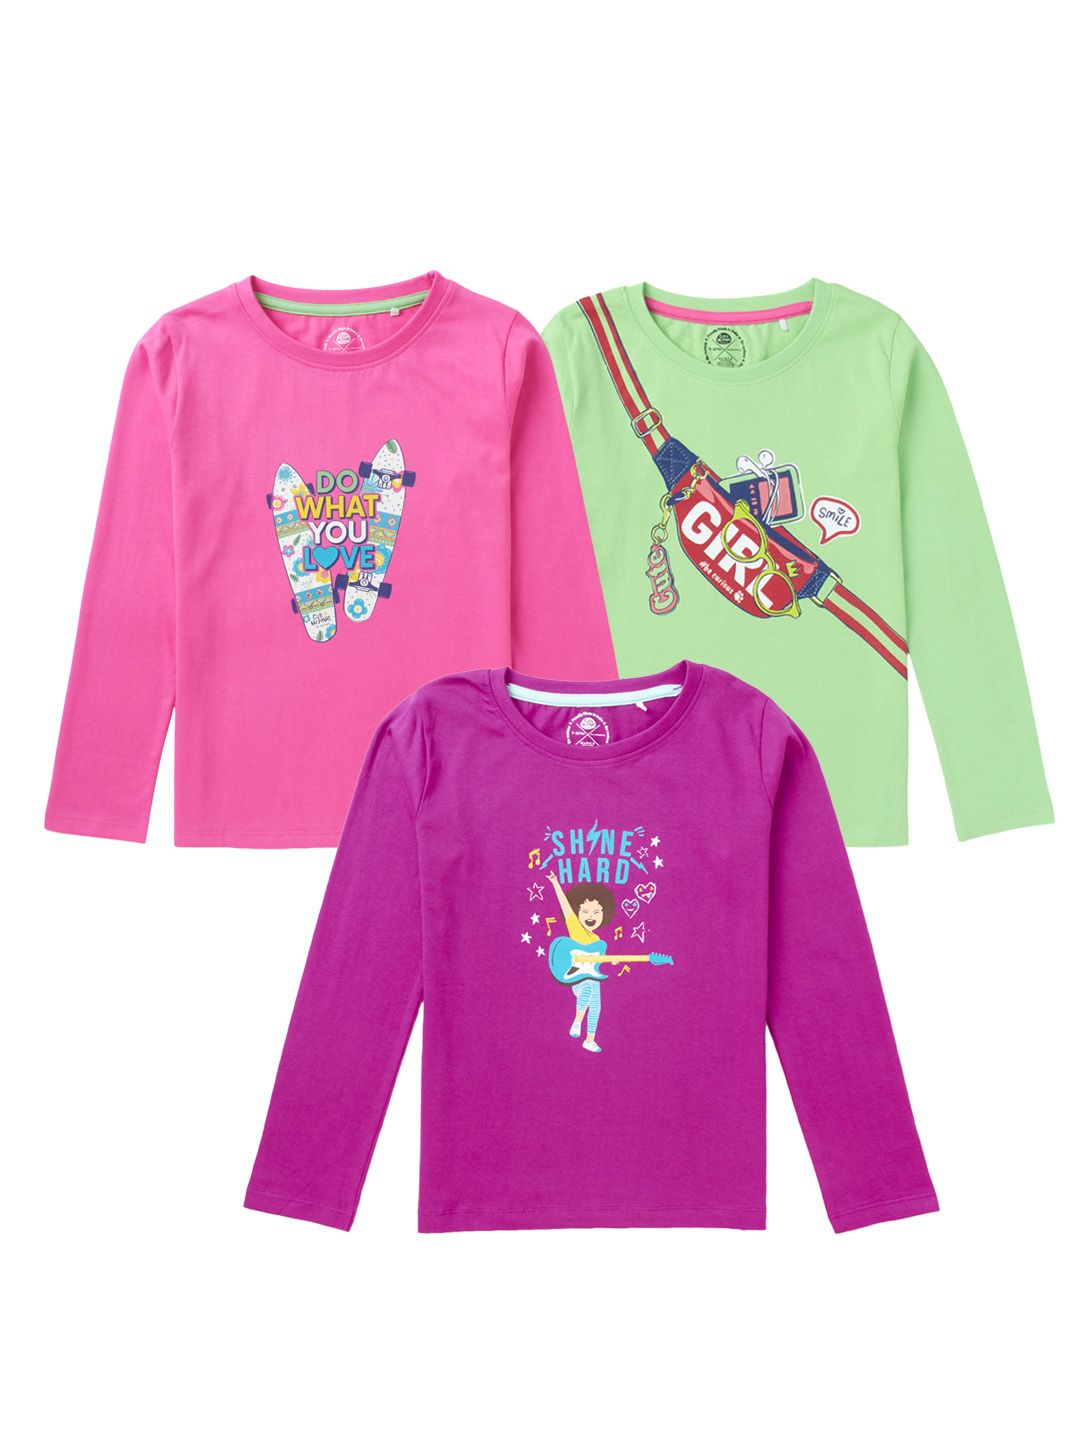 Girls Full Sleeves Pack of 3 T-Shirts 100% Cotton